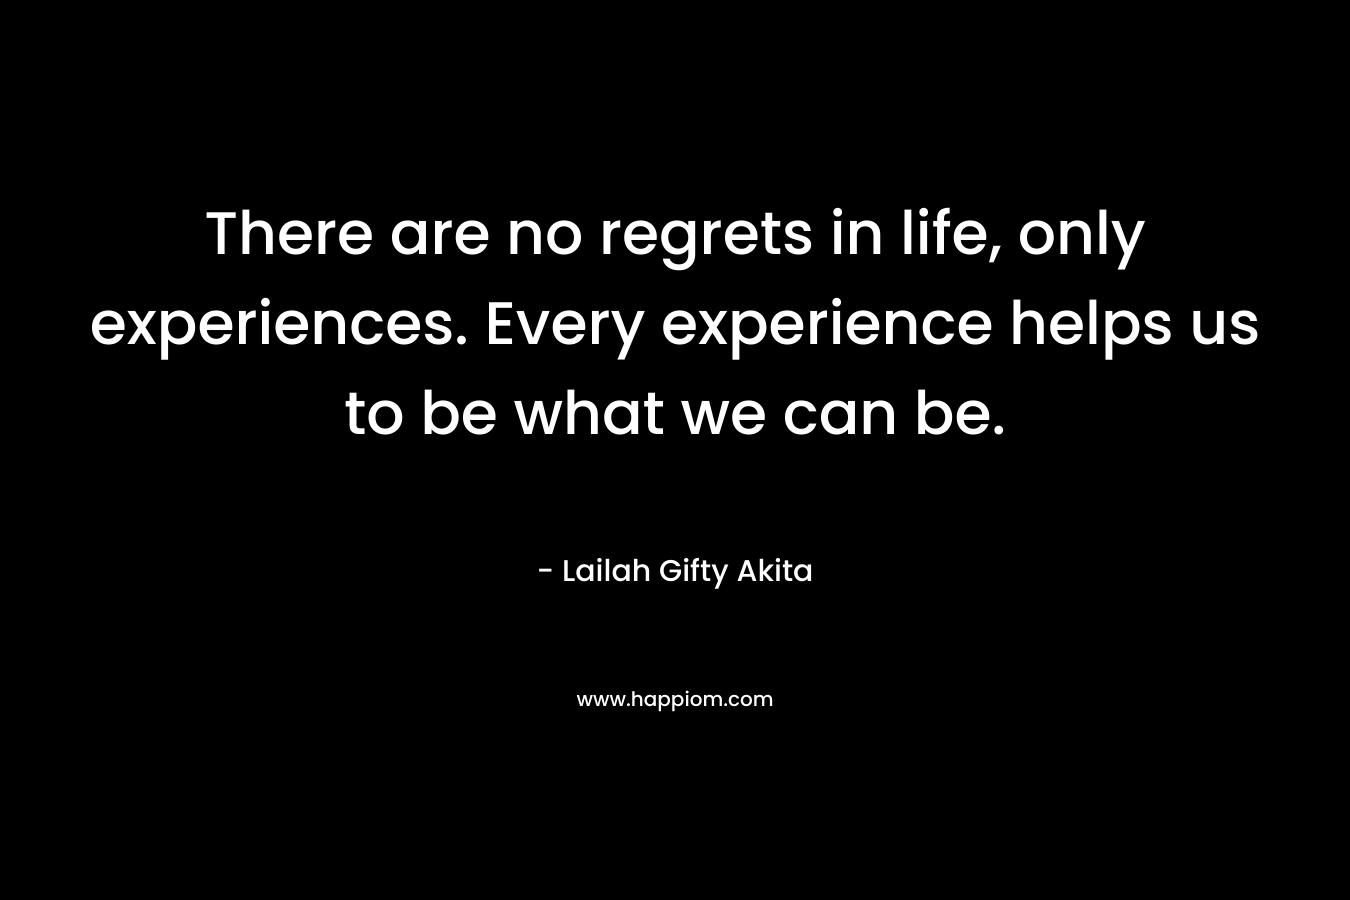 There are no regrets in life, only experiences. Every experience helps us to be what we can be.